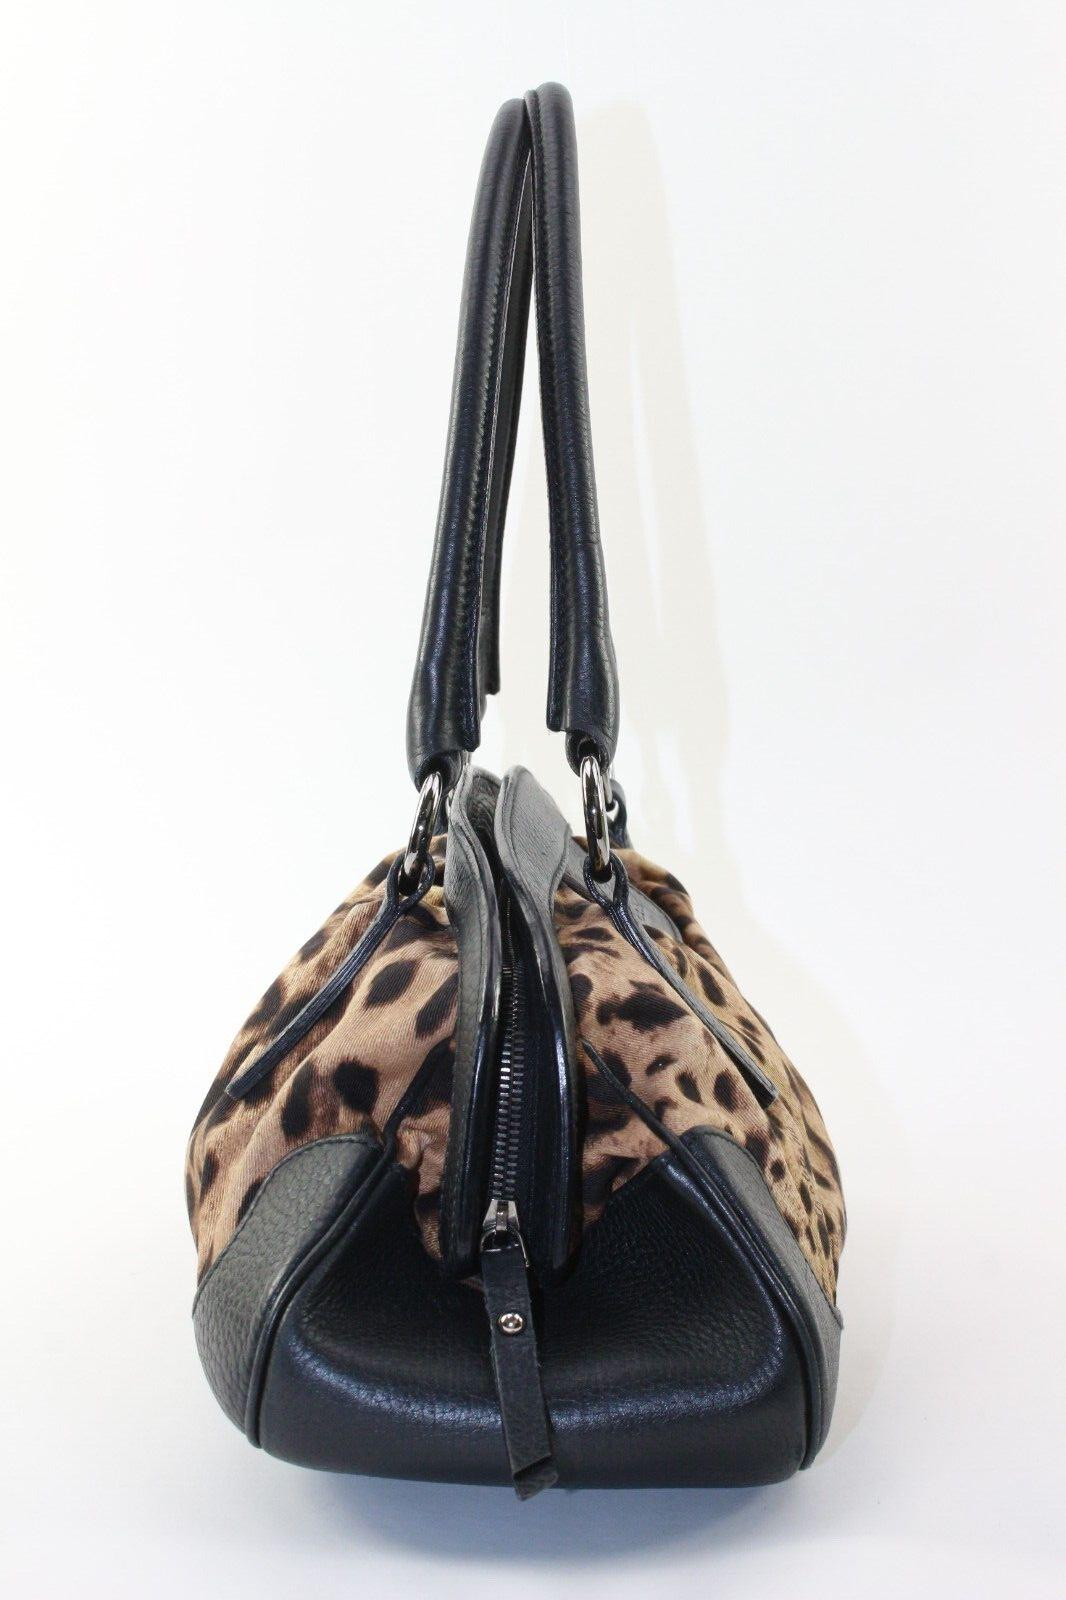 DOLCE AND GABBANA Doctor Closure Leopard Shoulder Bag 01DG1226K In Good Condition For Sale In Dix hills, NY